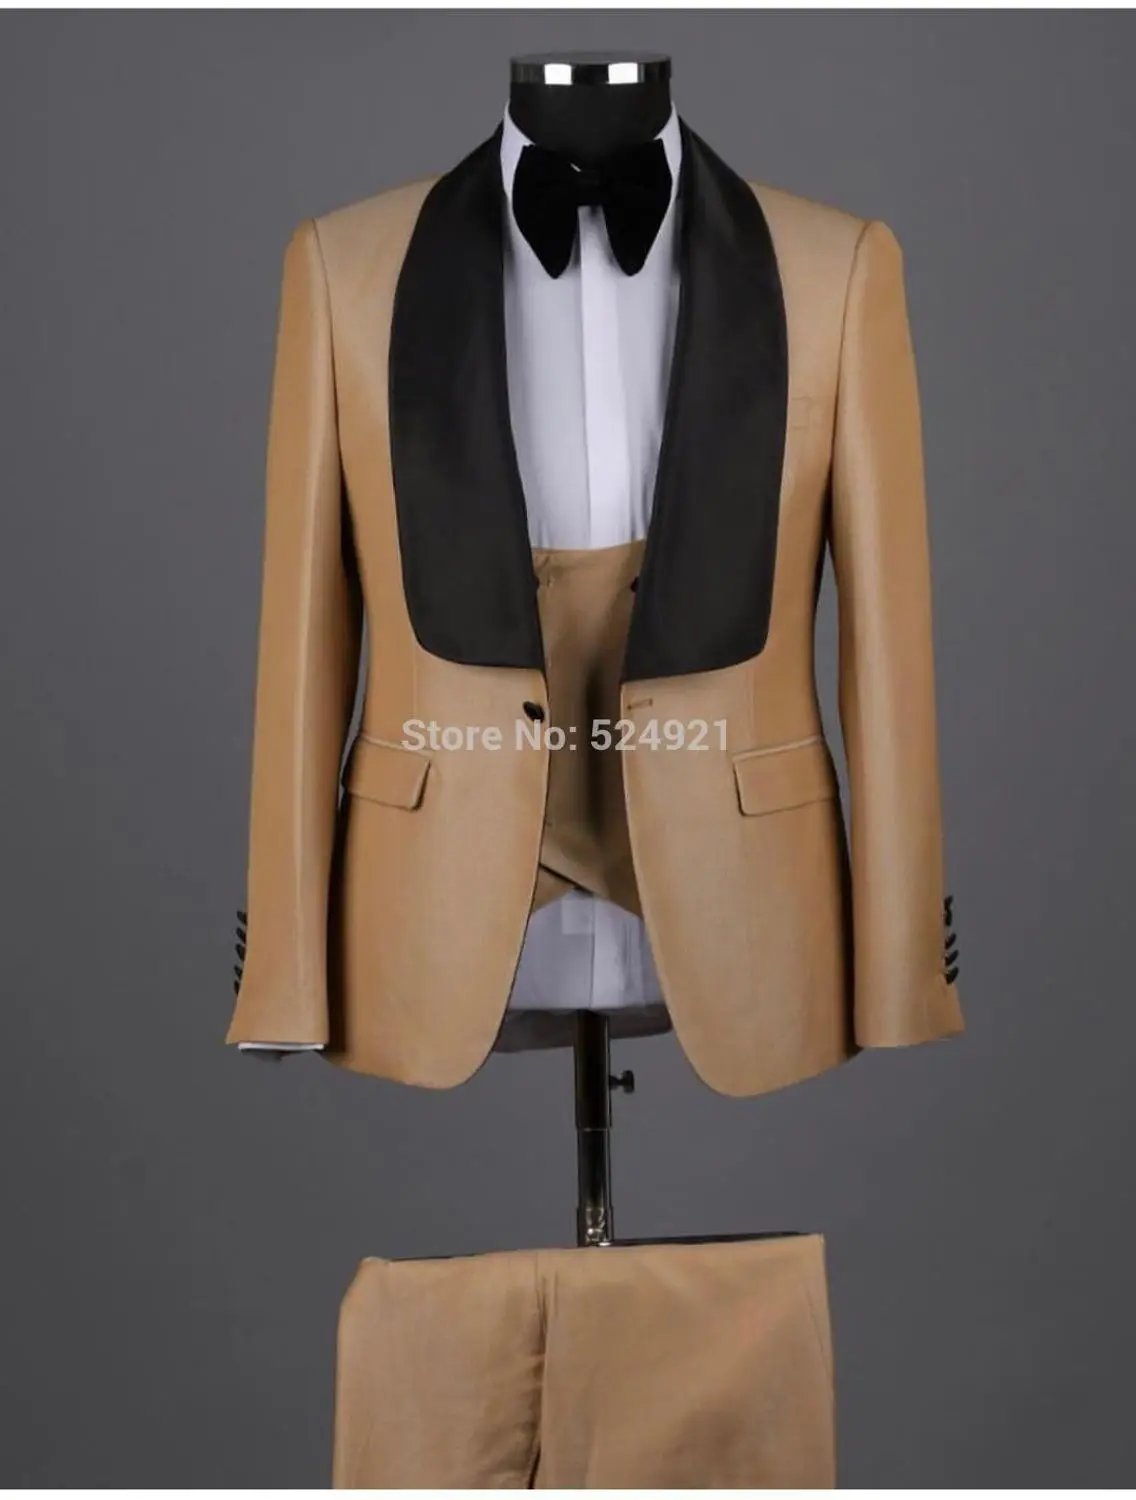 Men Suits Light Navy Blue and Black Groom Tuxedos - Luxurious Weddings